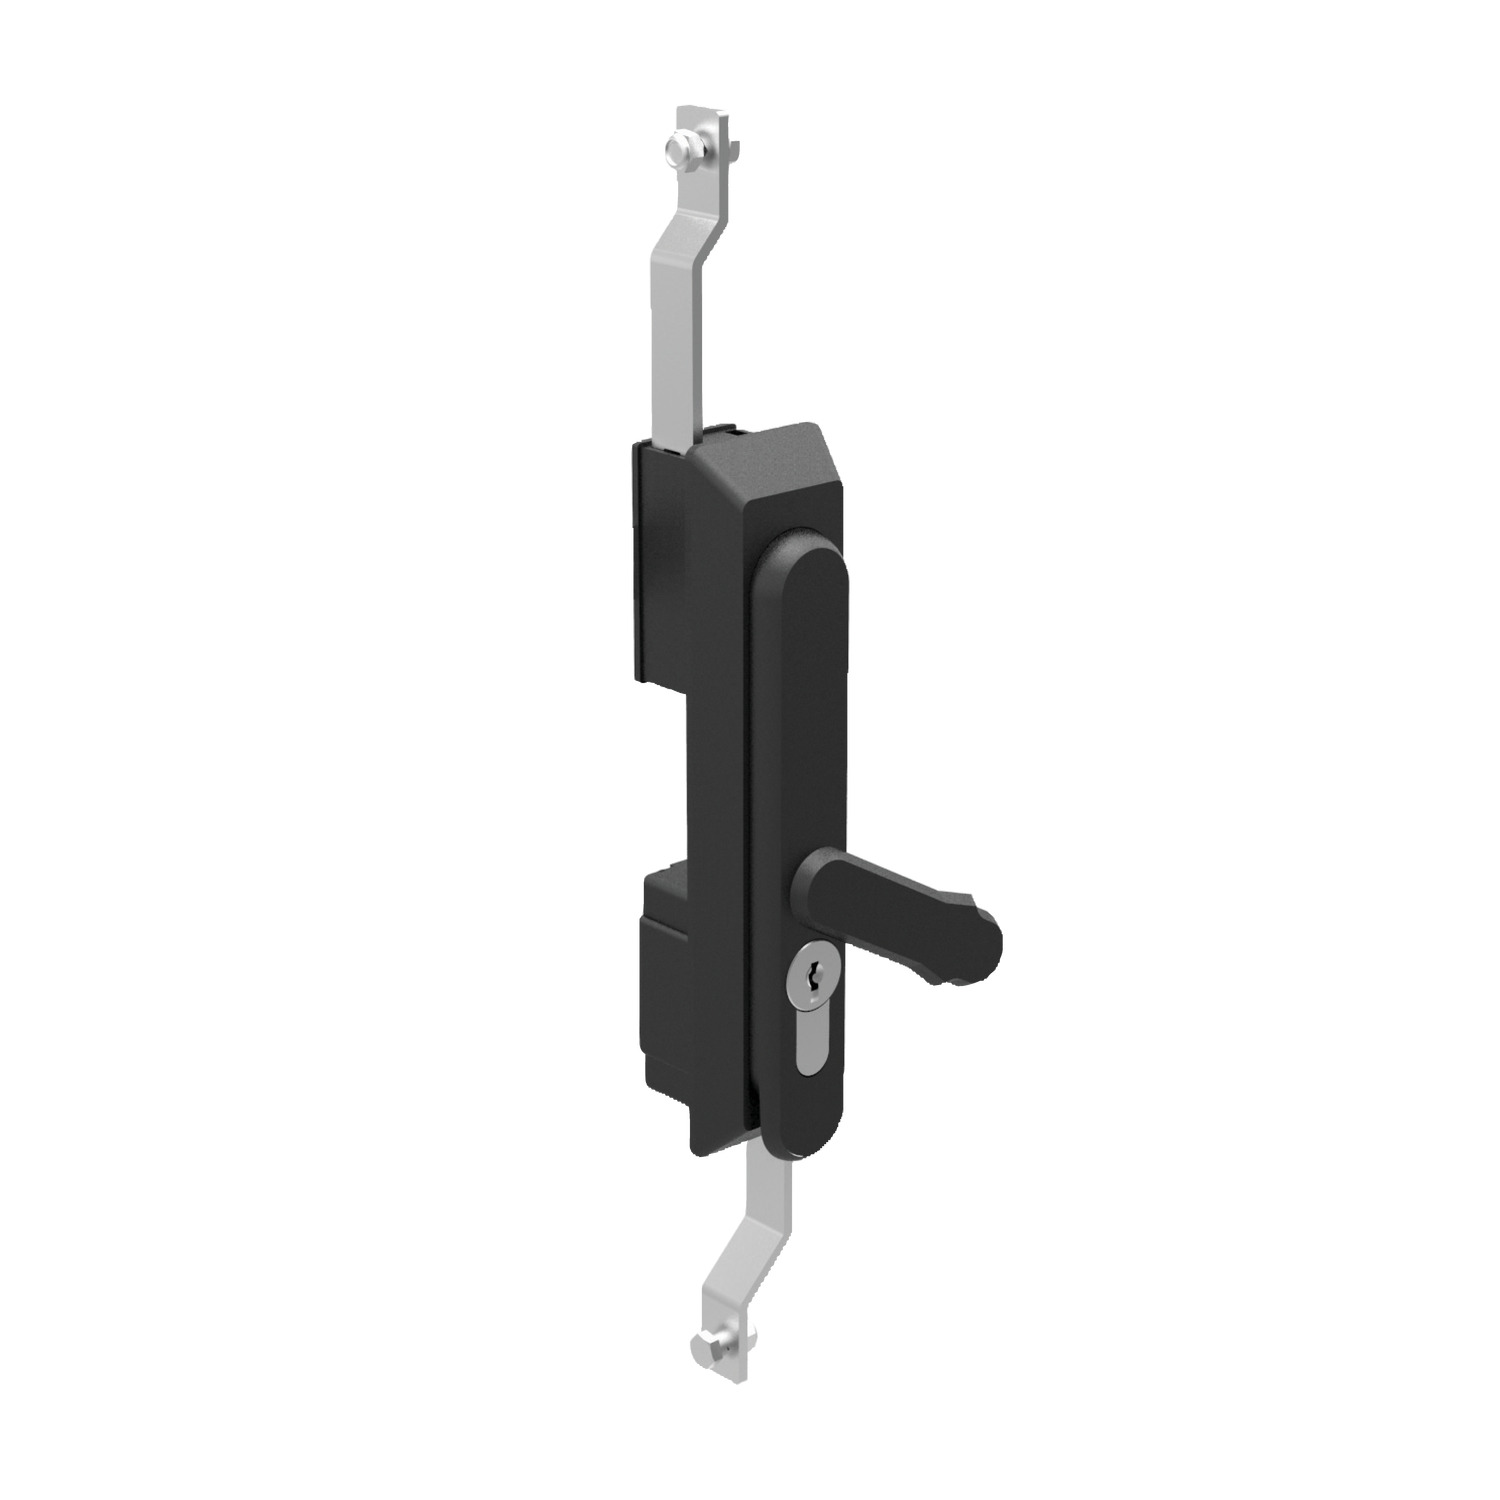 B2091 Swing Handles - with Rod Control